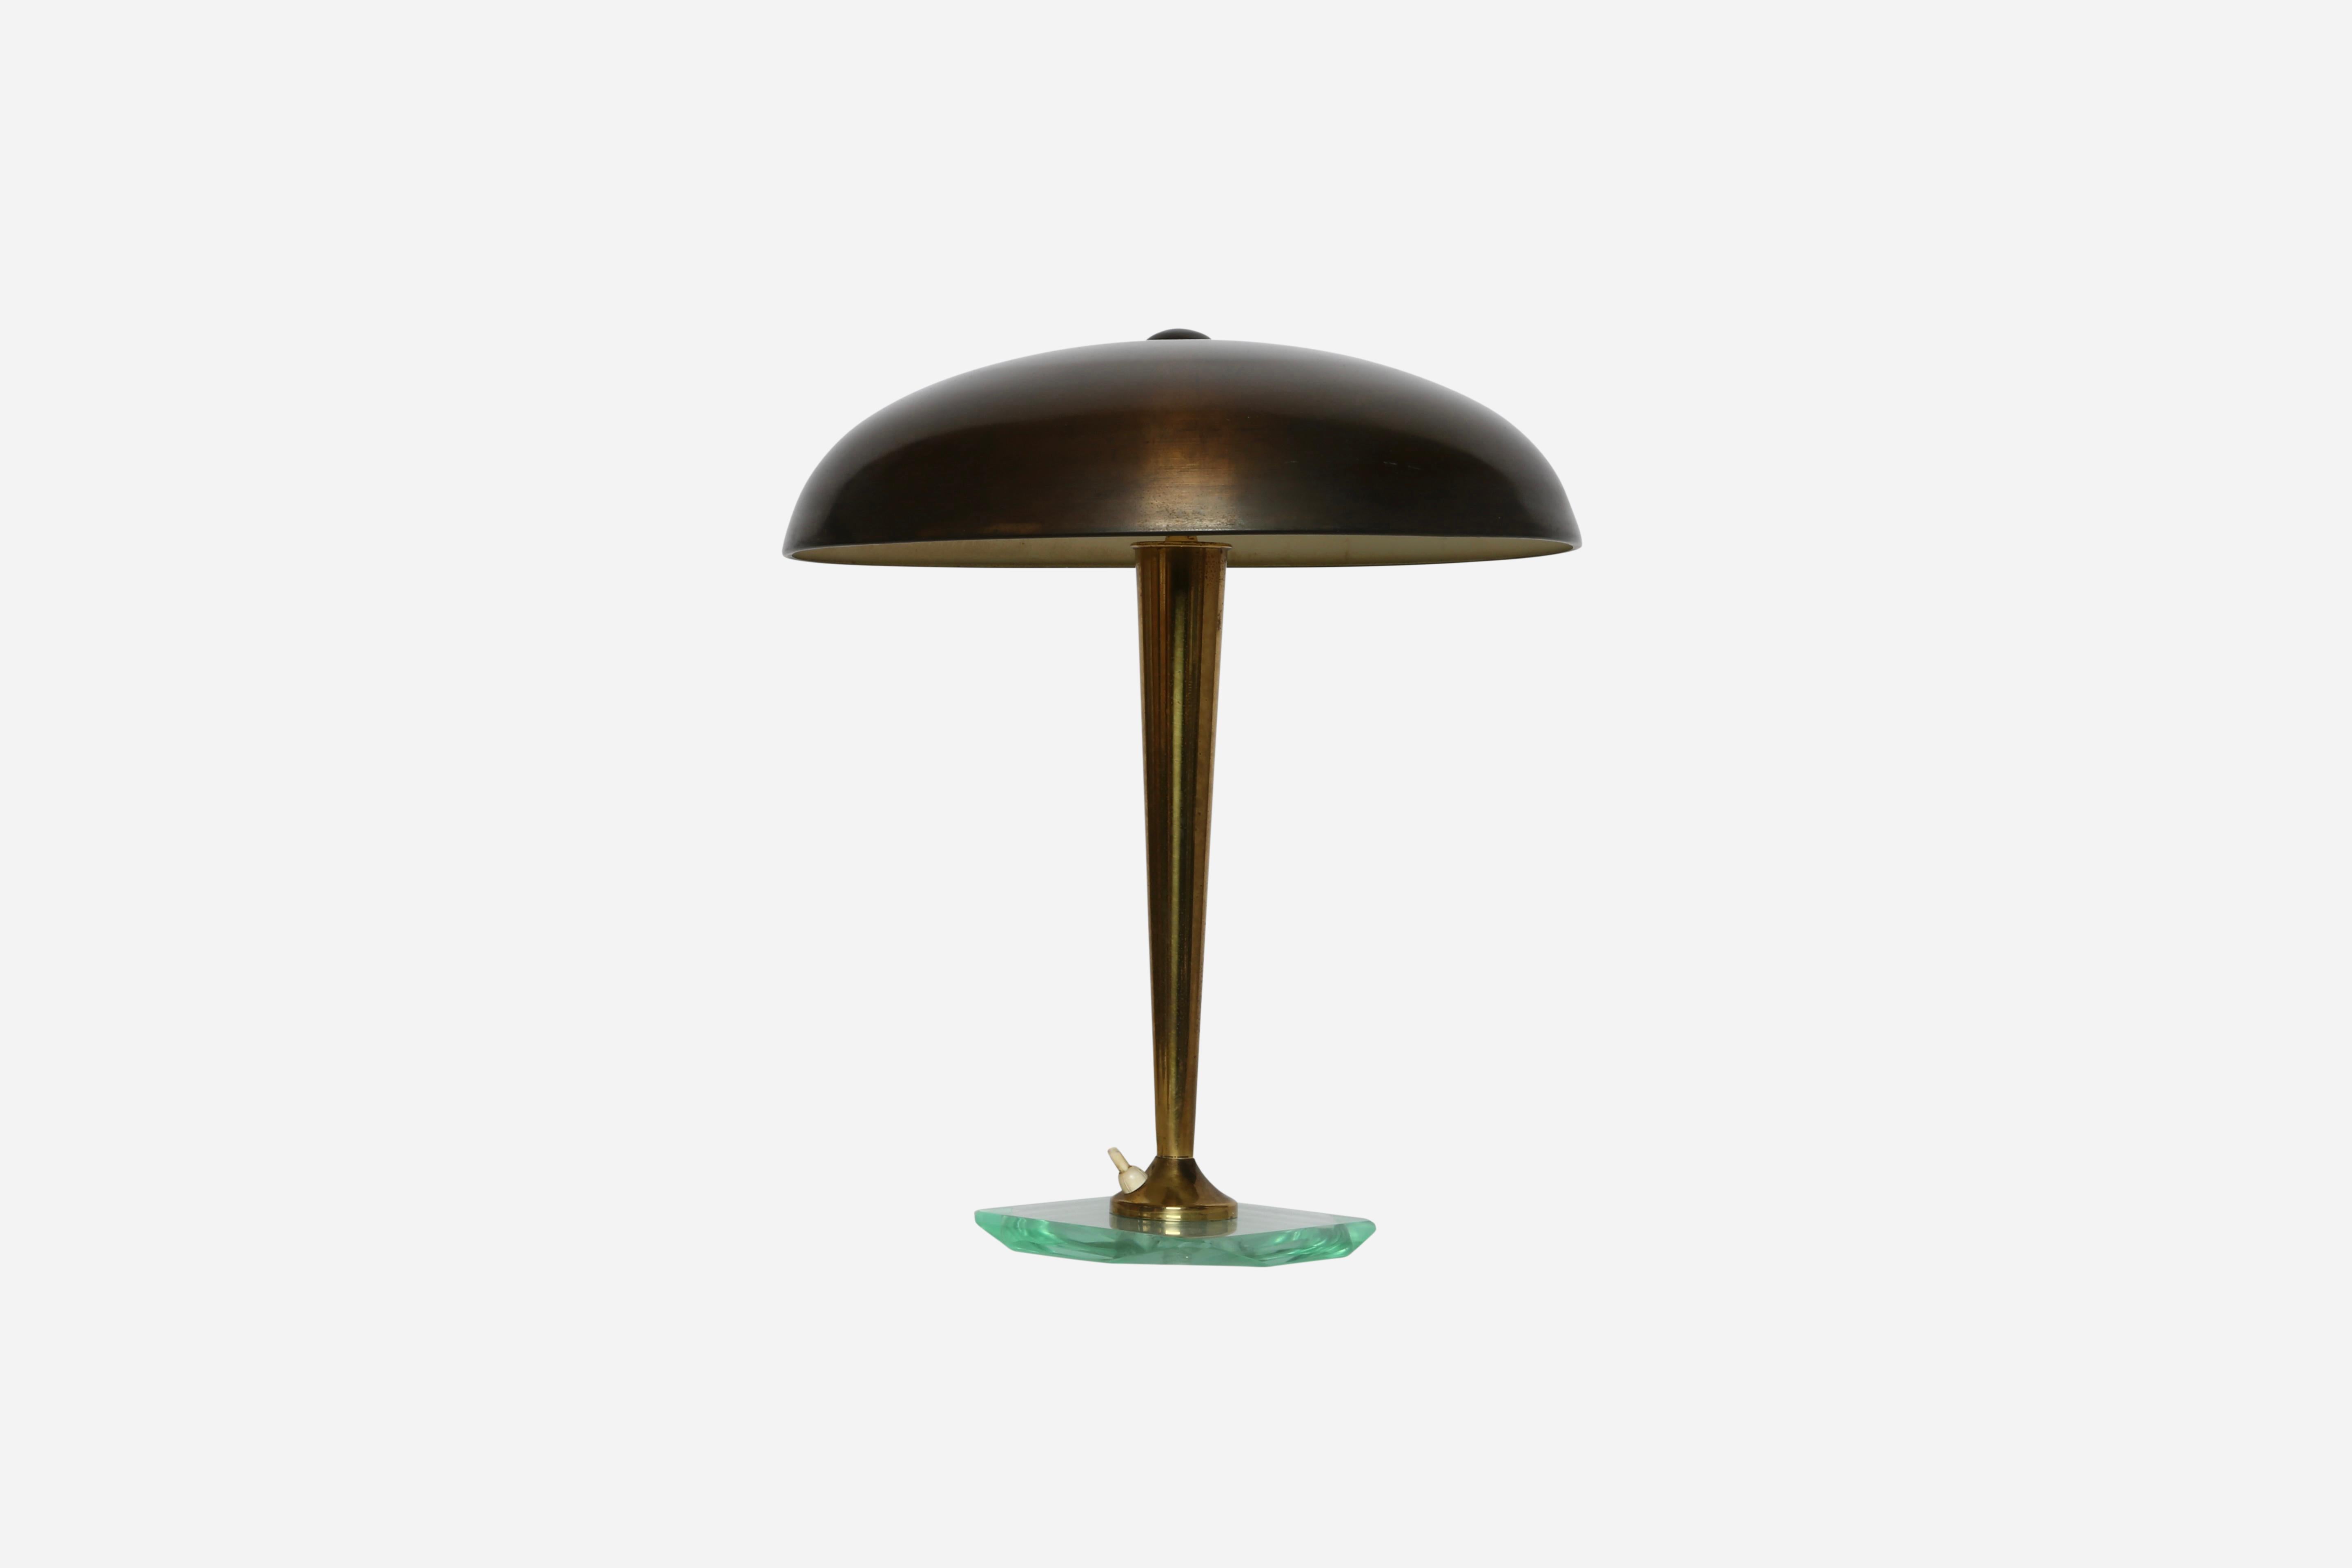 Pietro Chiesa for Fontana Arte table lamp
Designed and made in Italy in 1960s
Patinated brass shade, glass base.
2 candelabra sockets
Complimentary US rewiring upon request.

We take pride in bringing vintage fixtures to their full glory again.
At